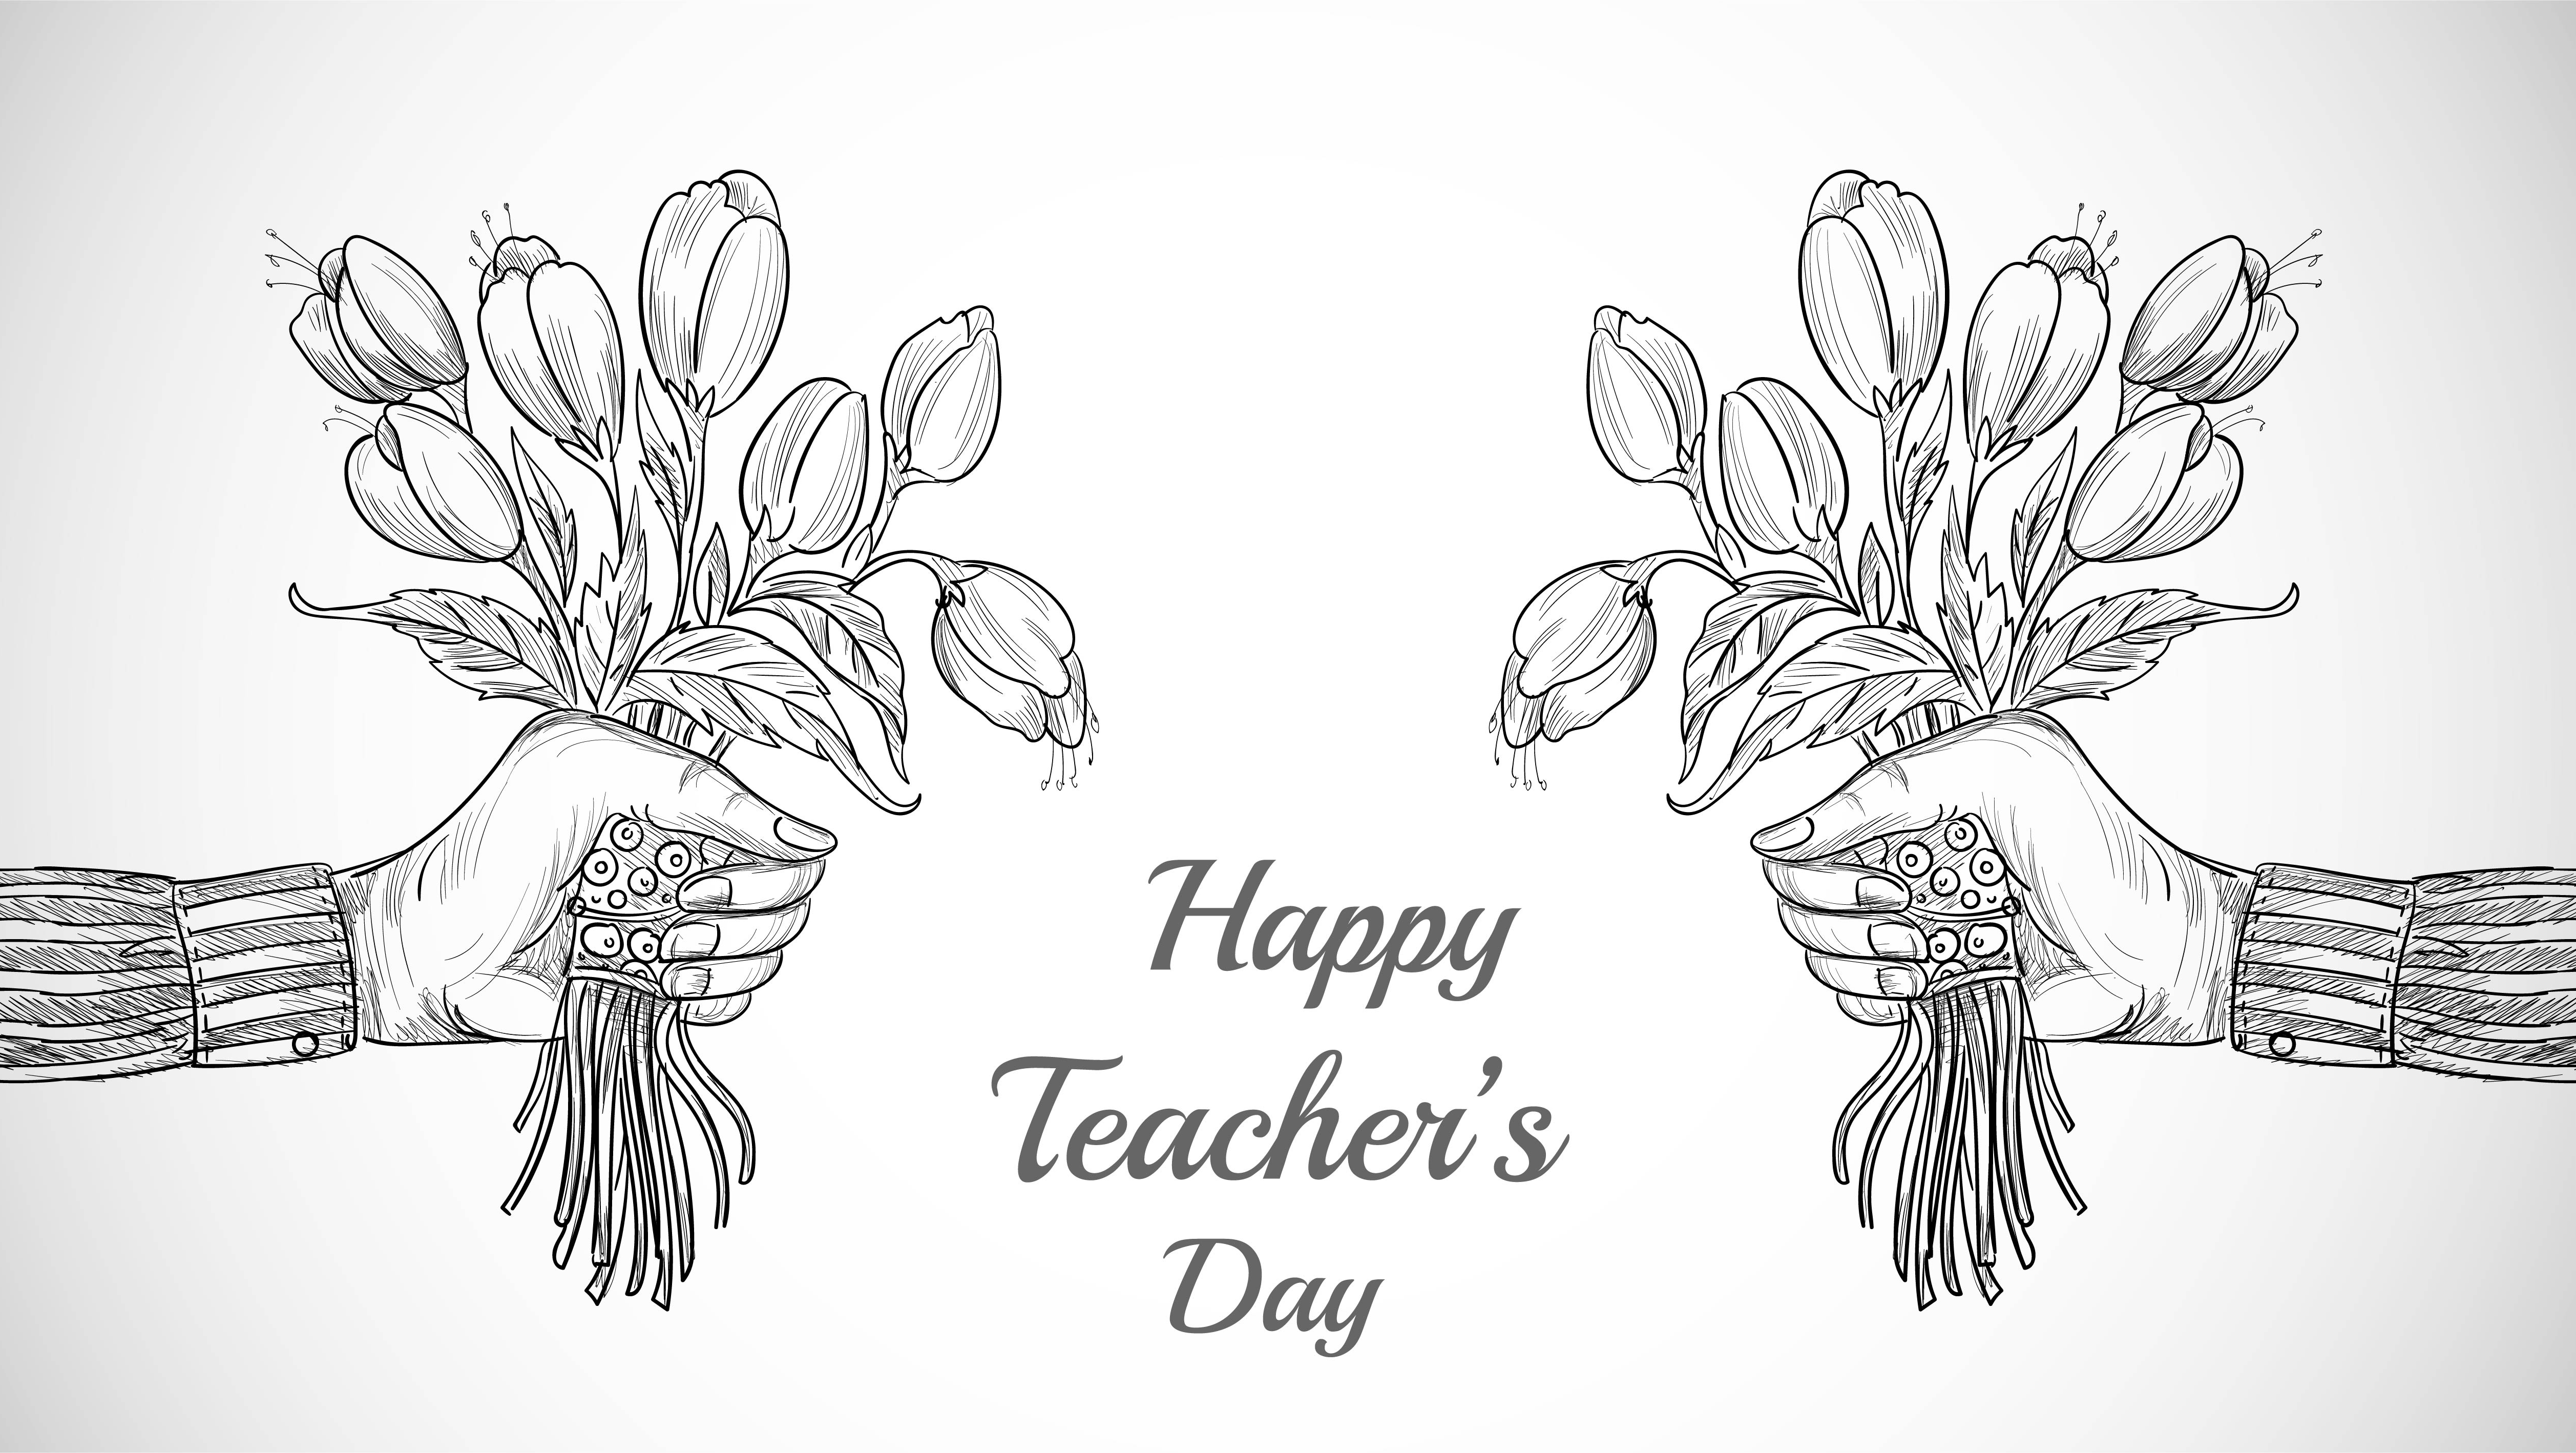 14 Teachers Day Special Drawing  Drawing For Teachers Day  Pencil  Sketching ideas  teachers day special teachers day teachers day drawing